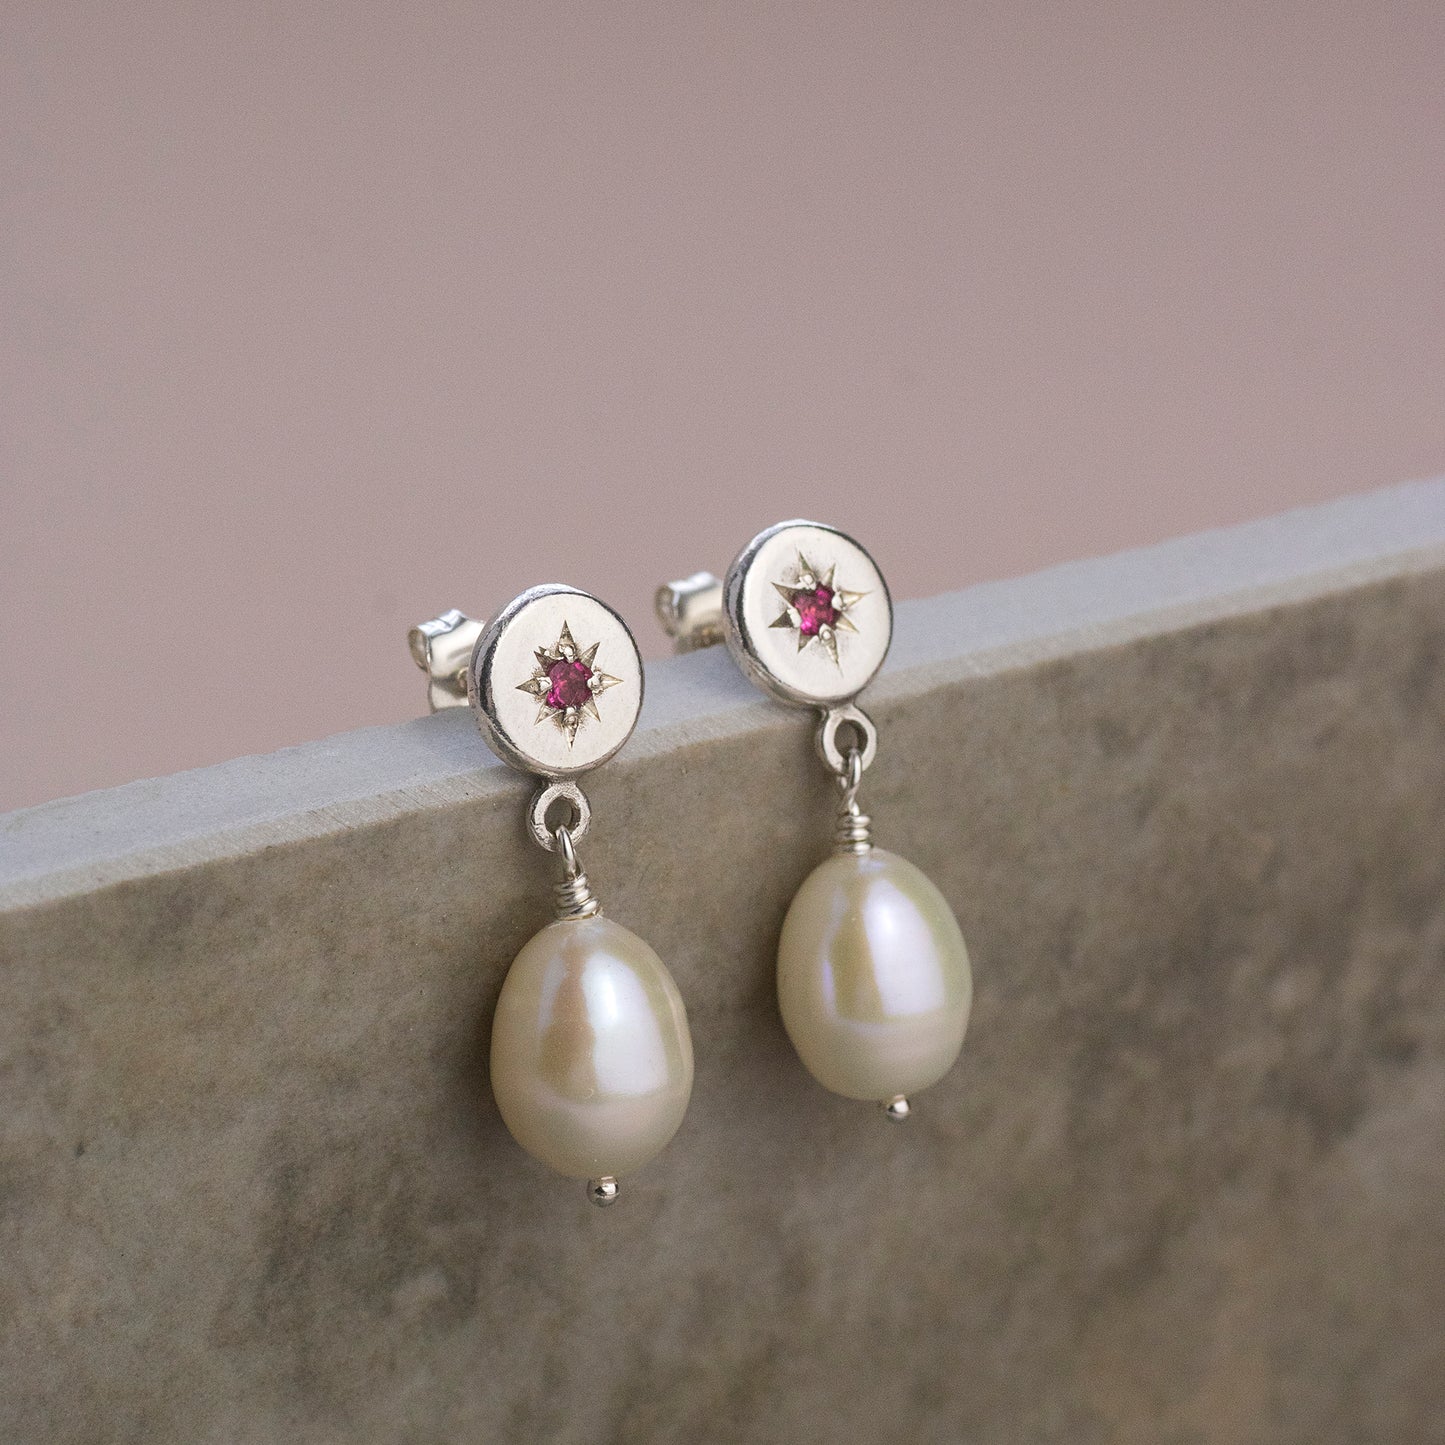 Gift for Granddaughter - Star Set Birthstone Earrings with Pearls - Silver